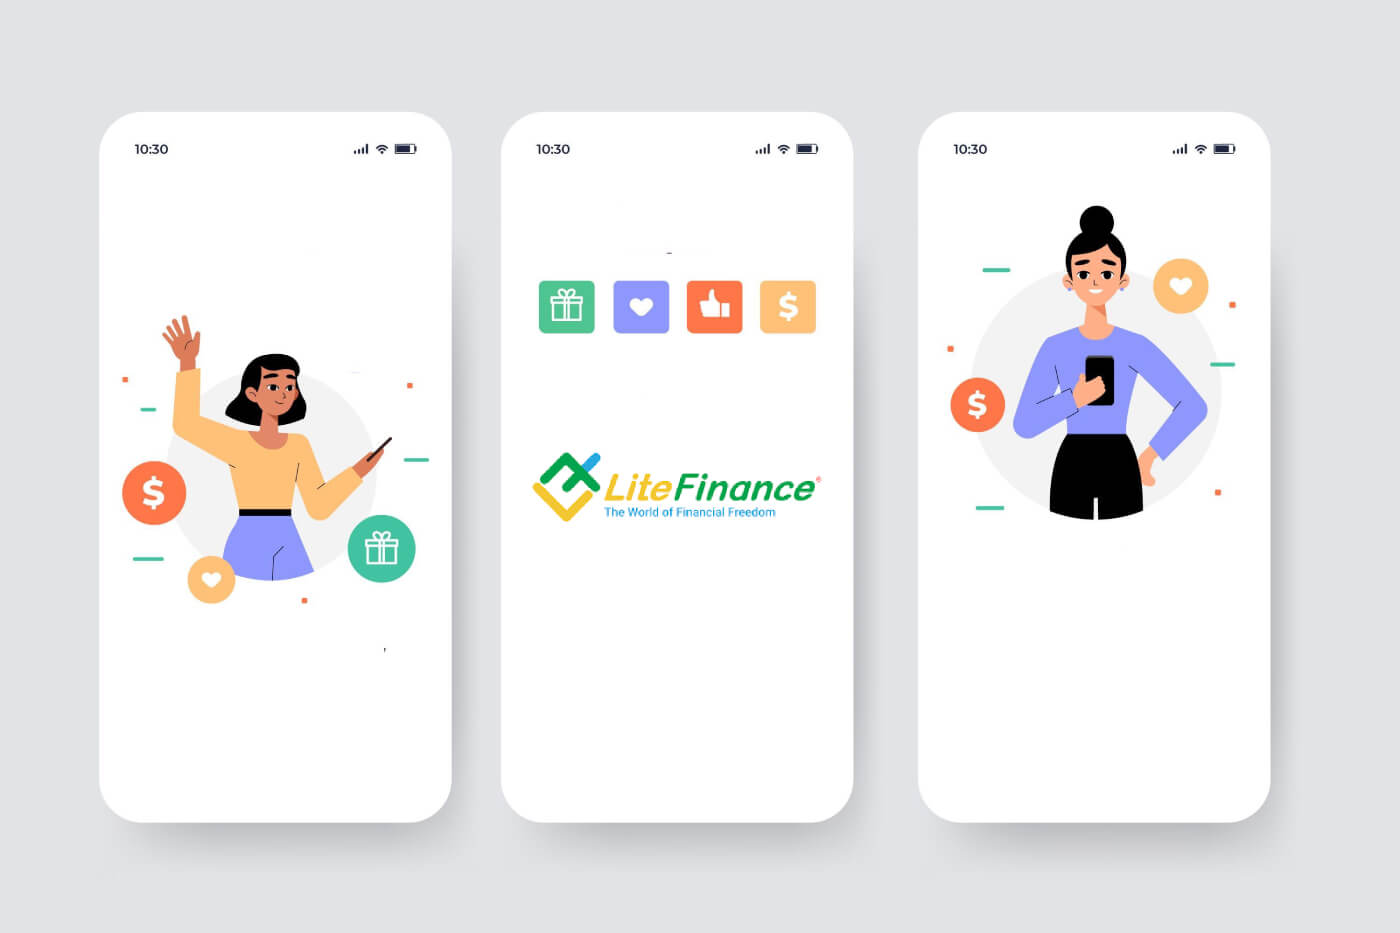 How to Download and Install LiteFinance Mobile Trading App for Mobile Phone (Android, iOS)